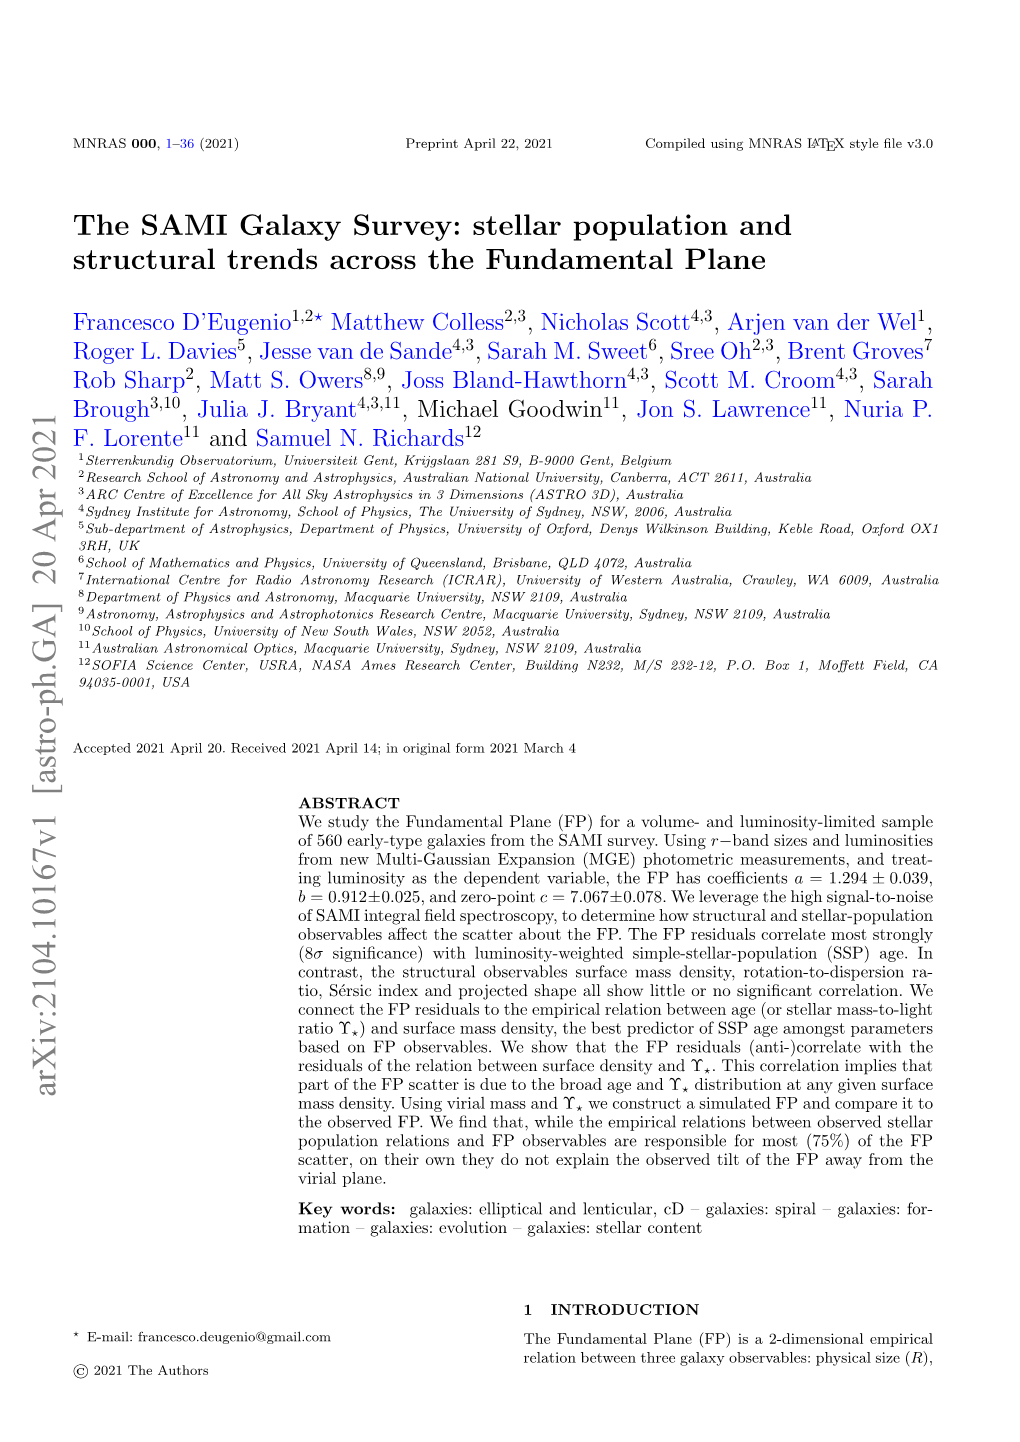 The SAMI Galaxy Survey: Stellar Population and Structural Trends Across the Fundamental Plane